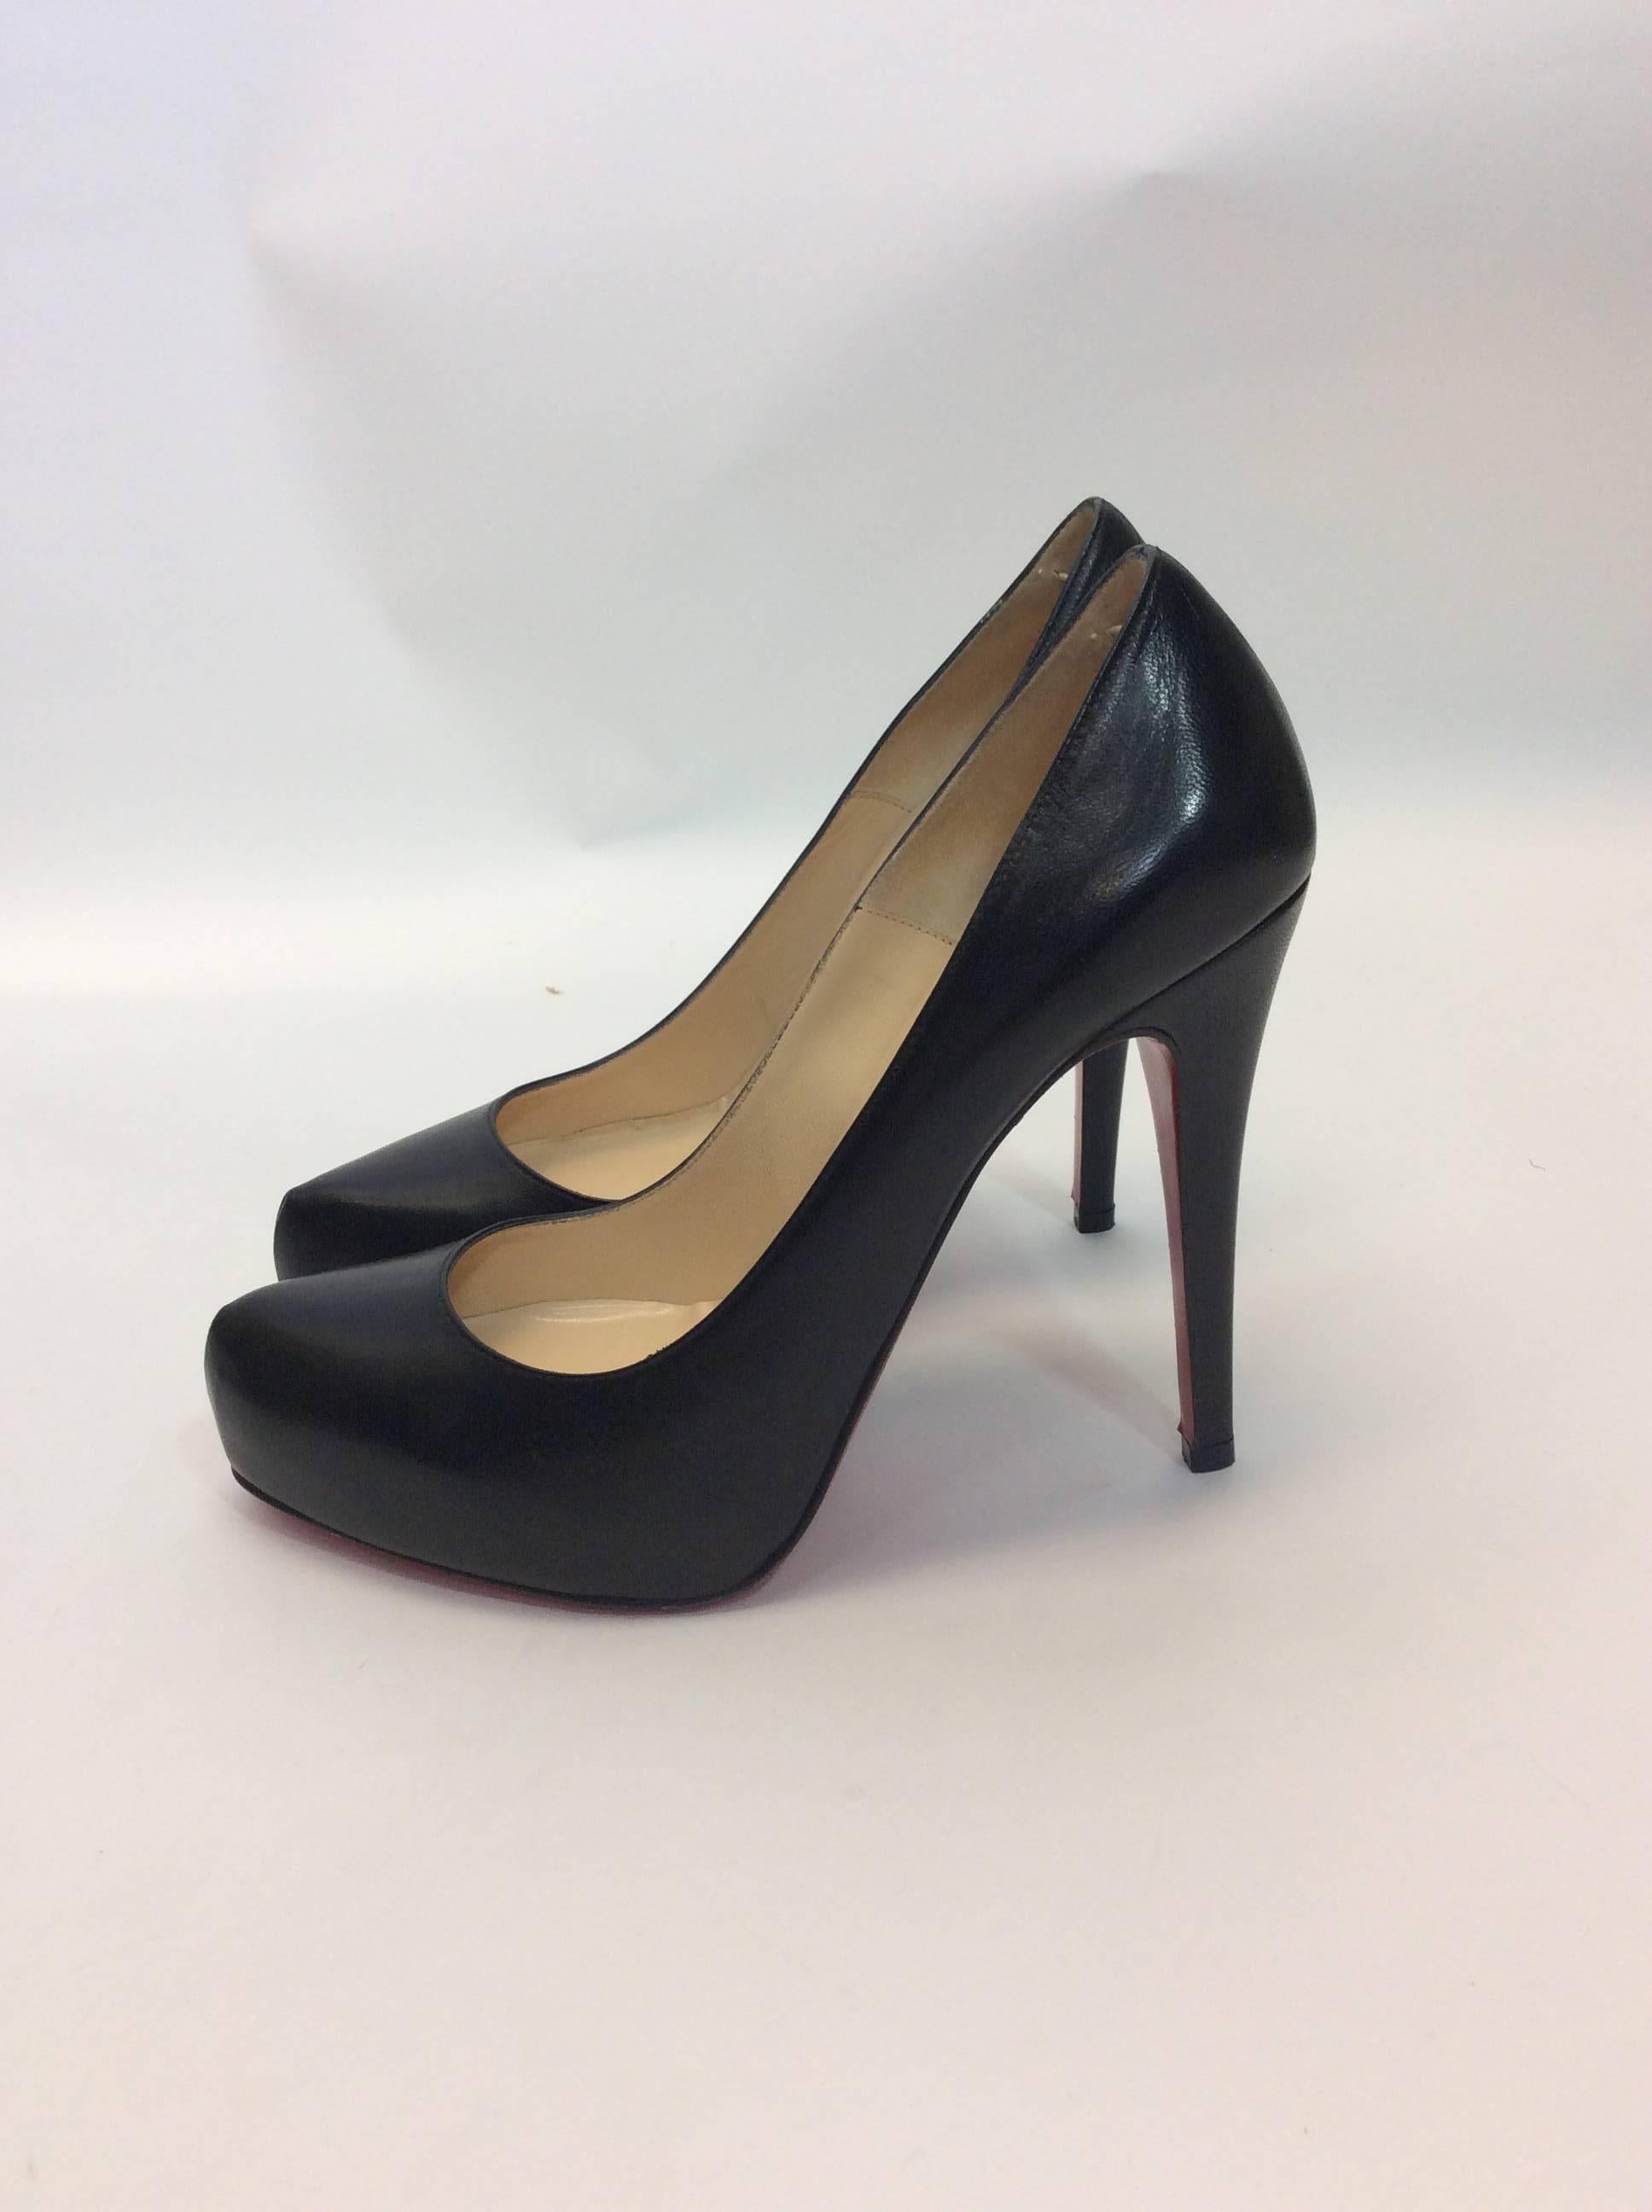 Christian Louboutin Black Leather Pumps
Size 37.5
Made in Italy
$400
4.5 inch heel